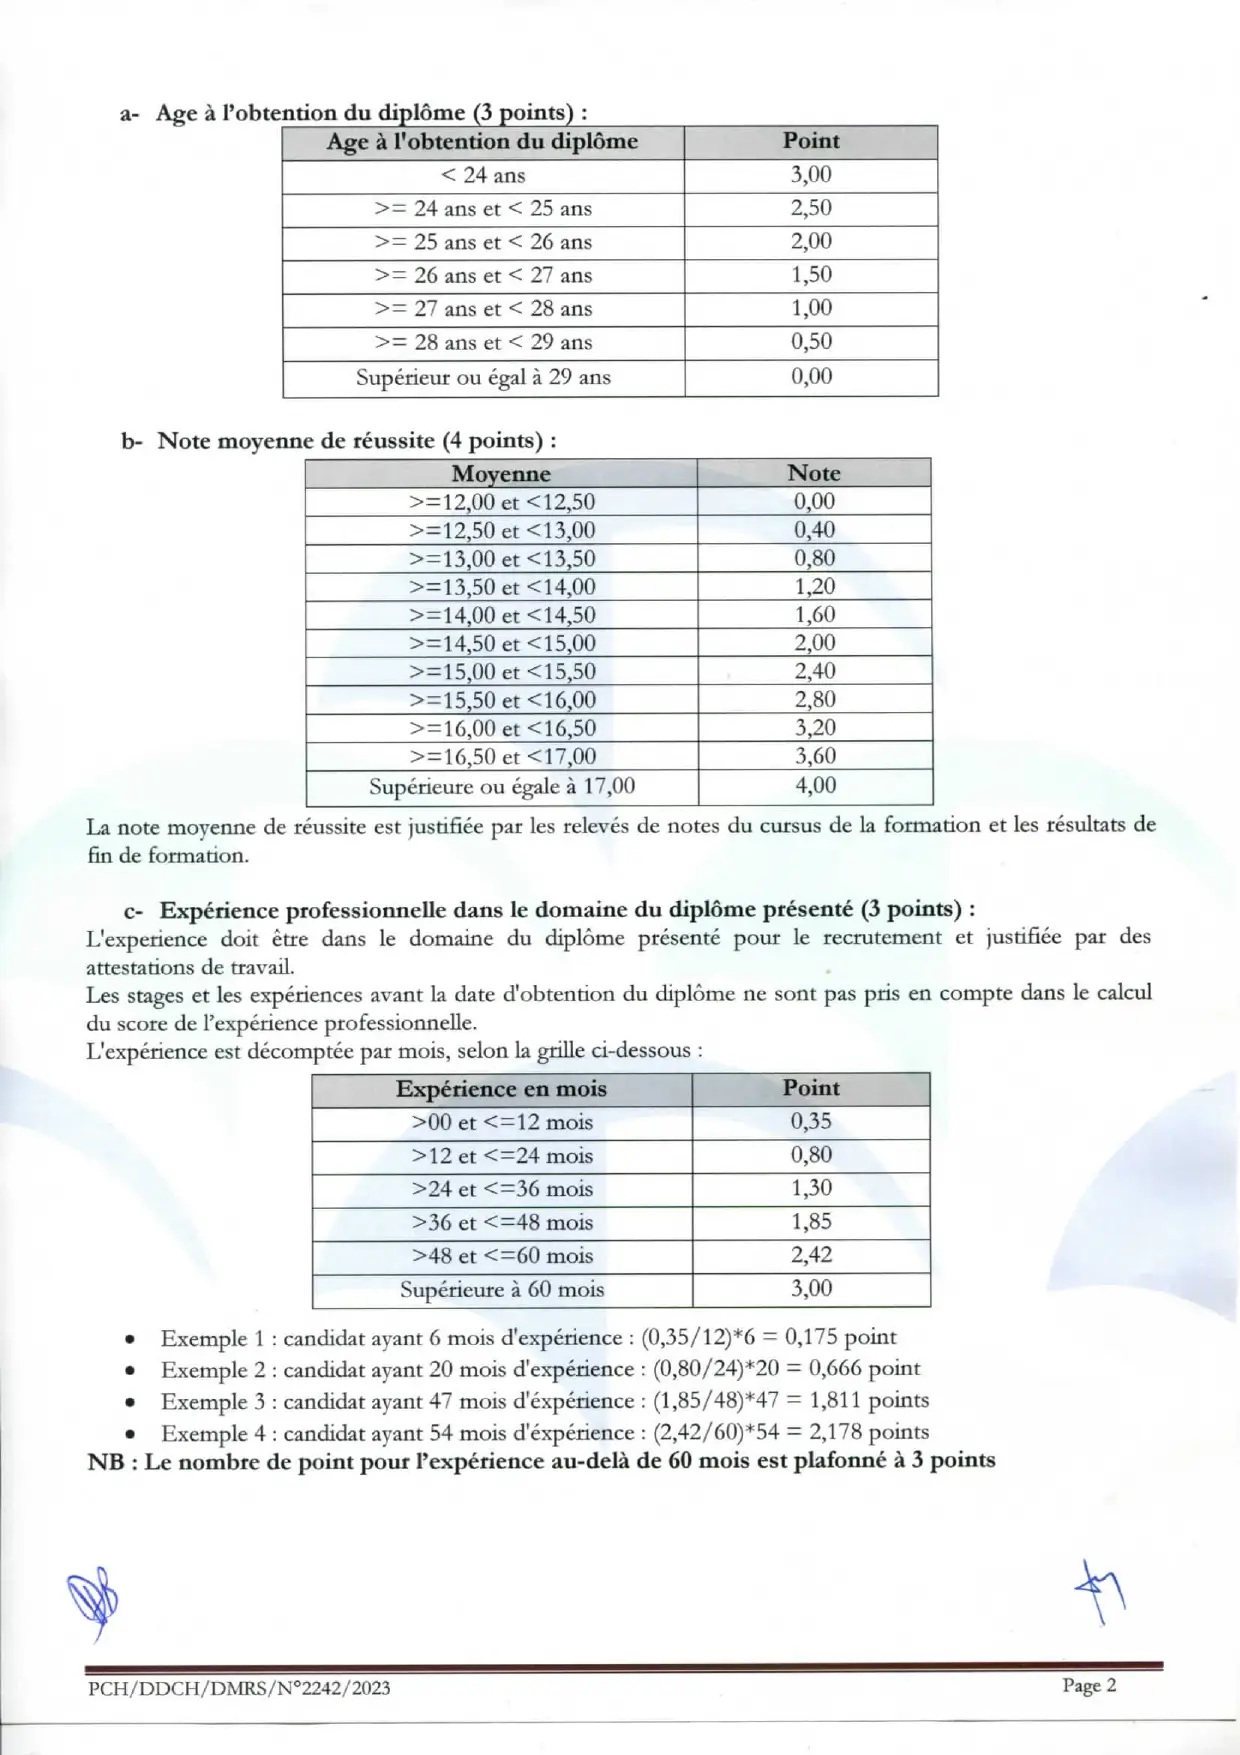 Concours Recrutement CNSS 2023 (12 postes)